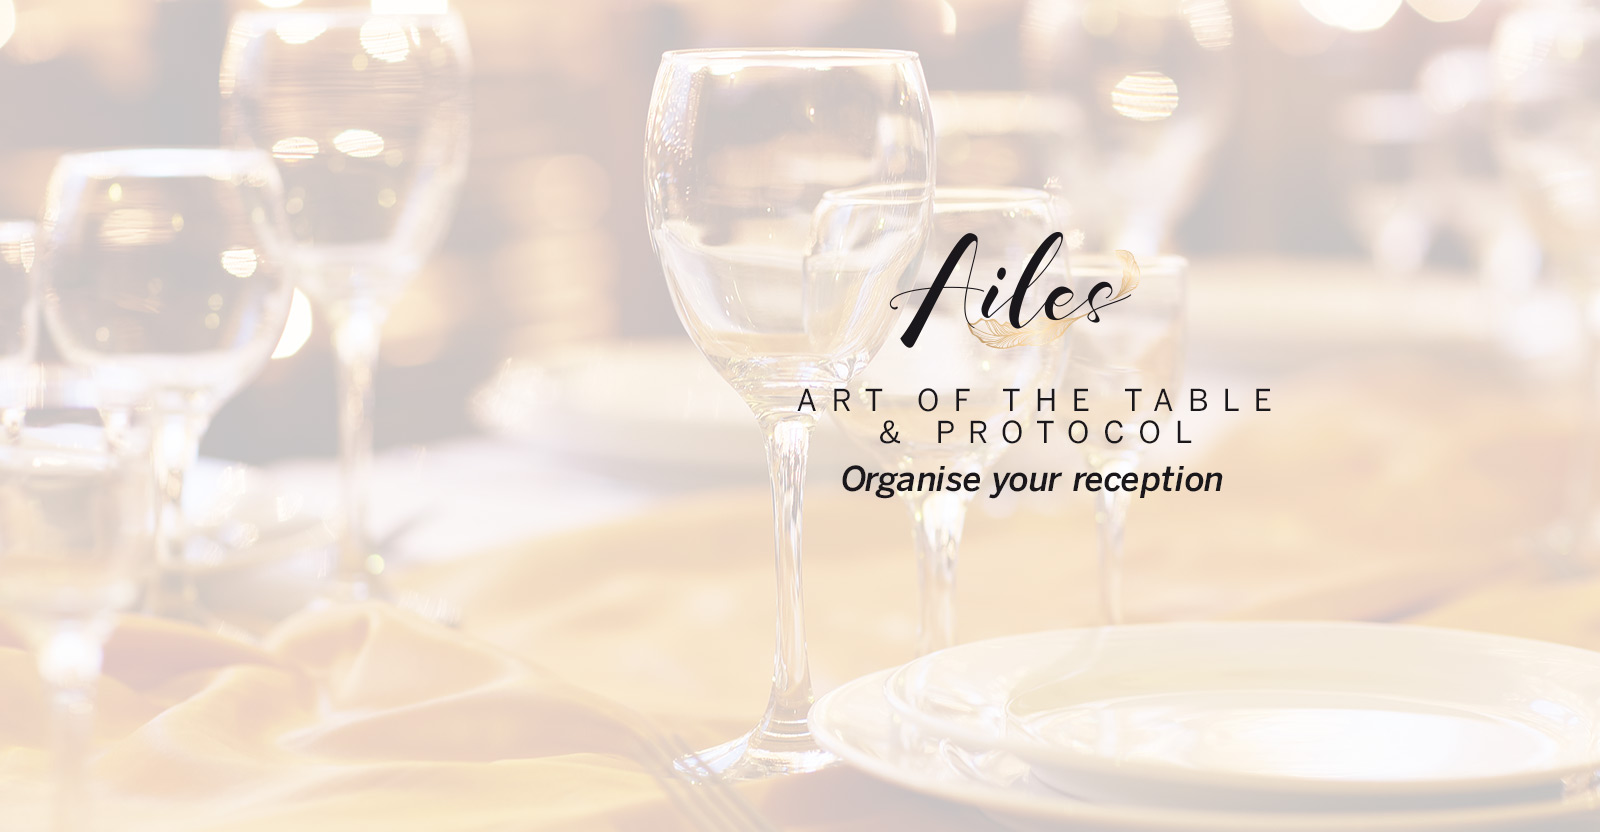 Art of the table & protocol